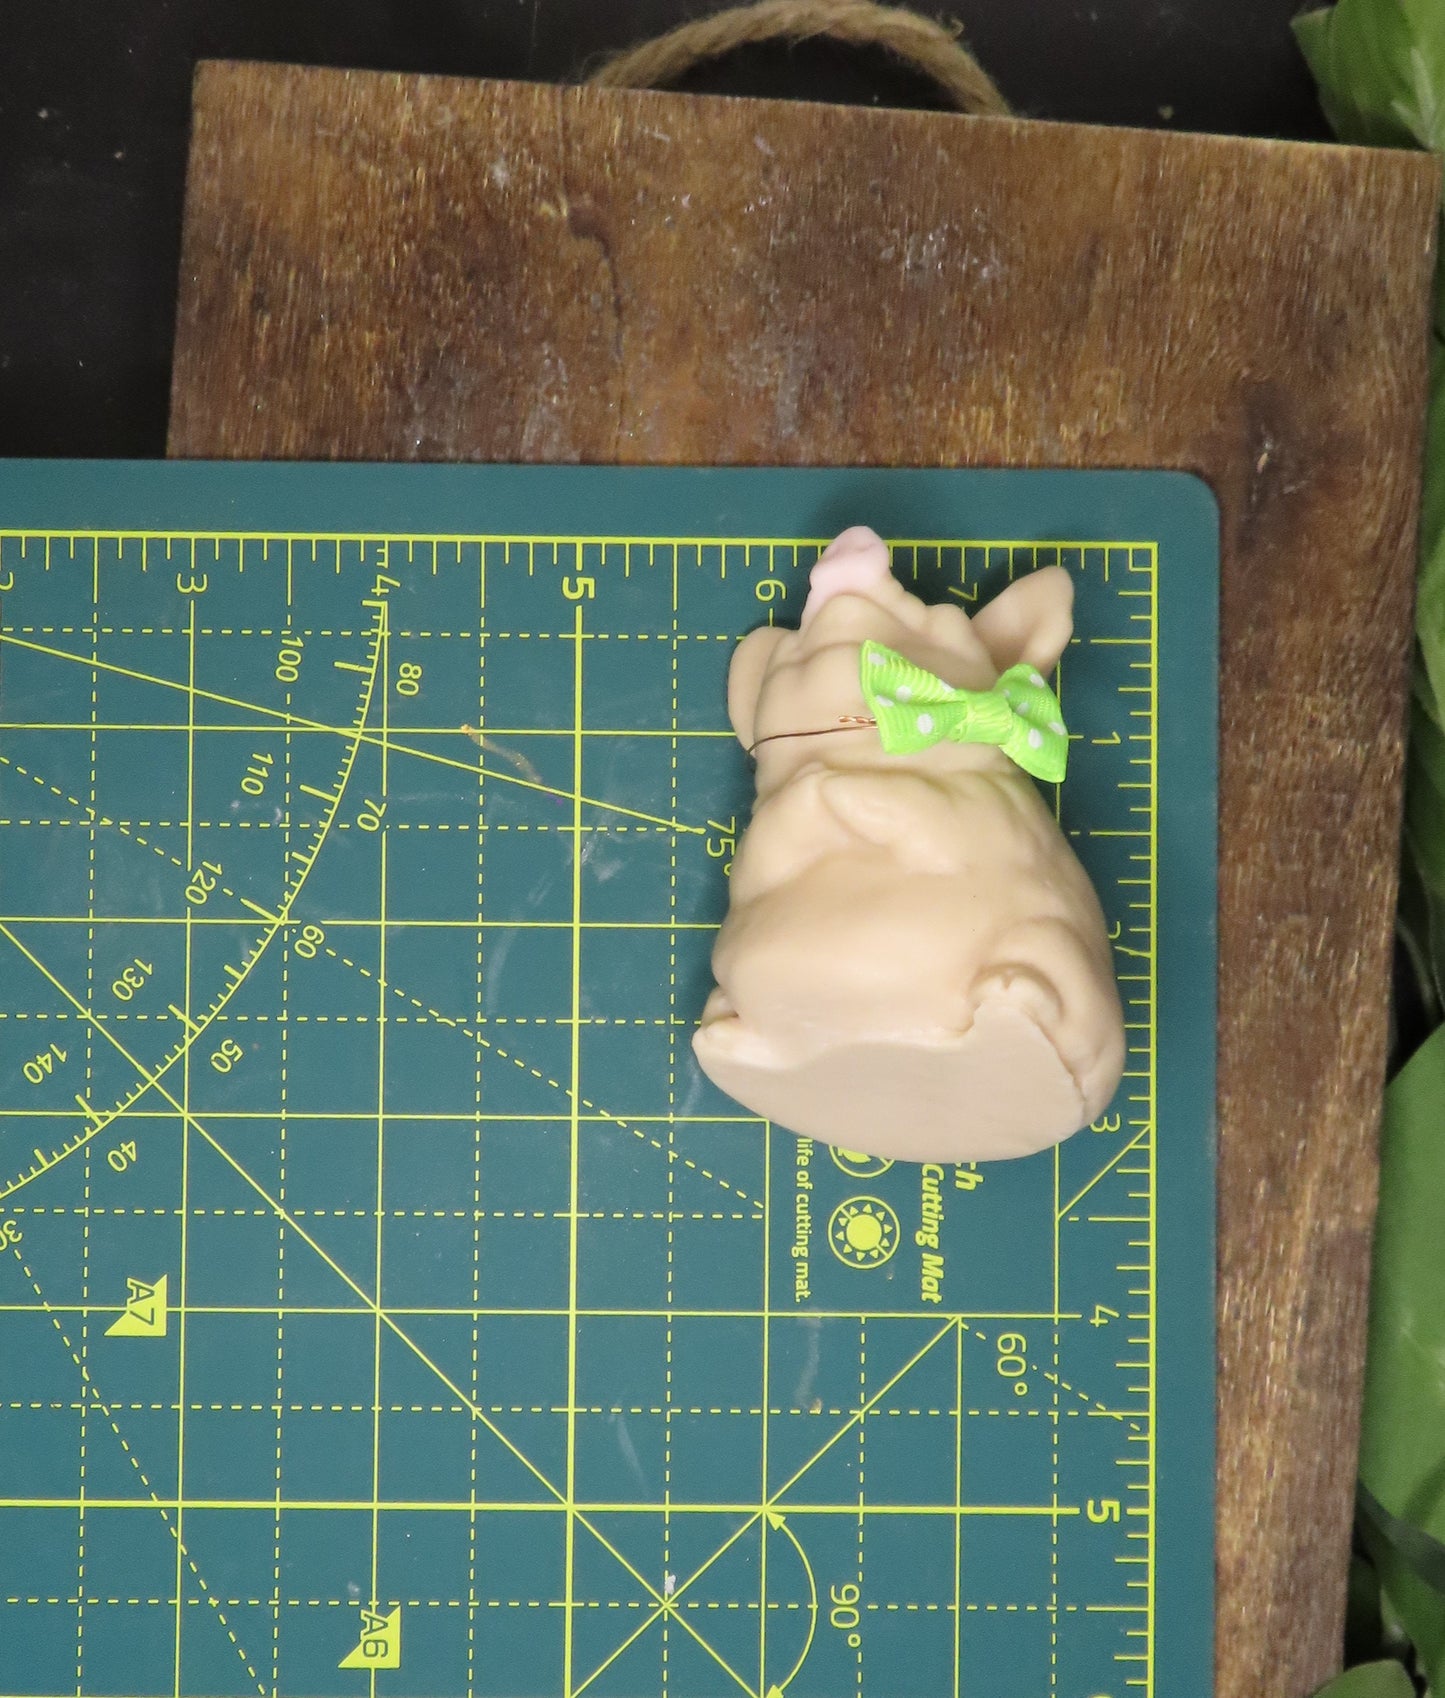 Image of pig goat milk soap on cutting board showing size of approximately 3 inches tall by 1.5 inches wide. 